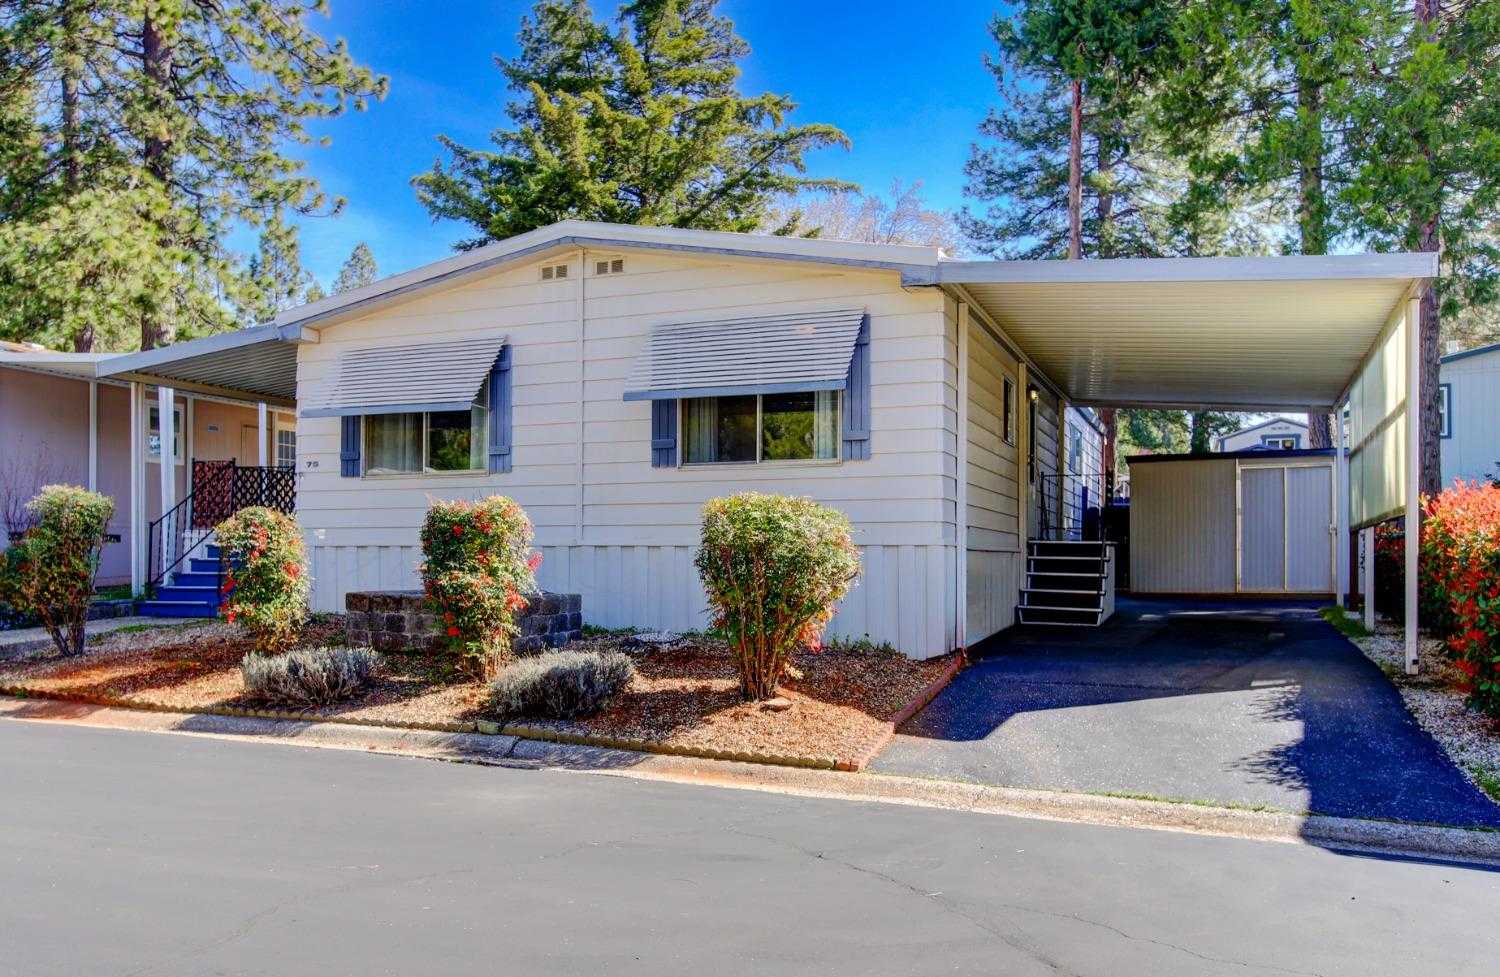 $110,000 - 2Br/2Ba -  for Sale in Grass Valley